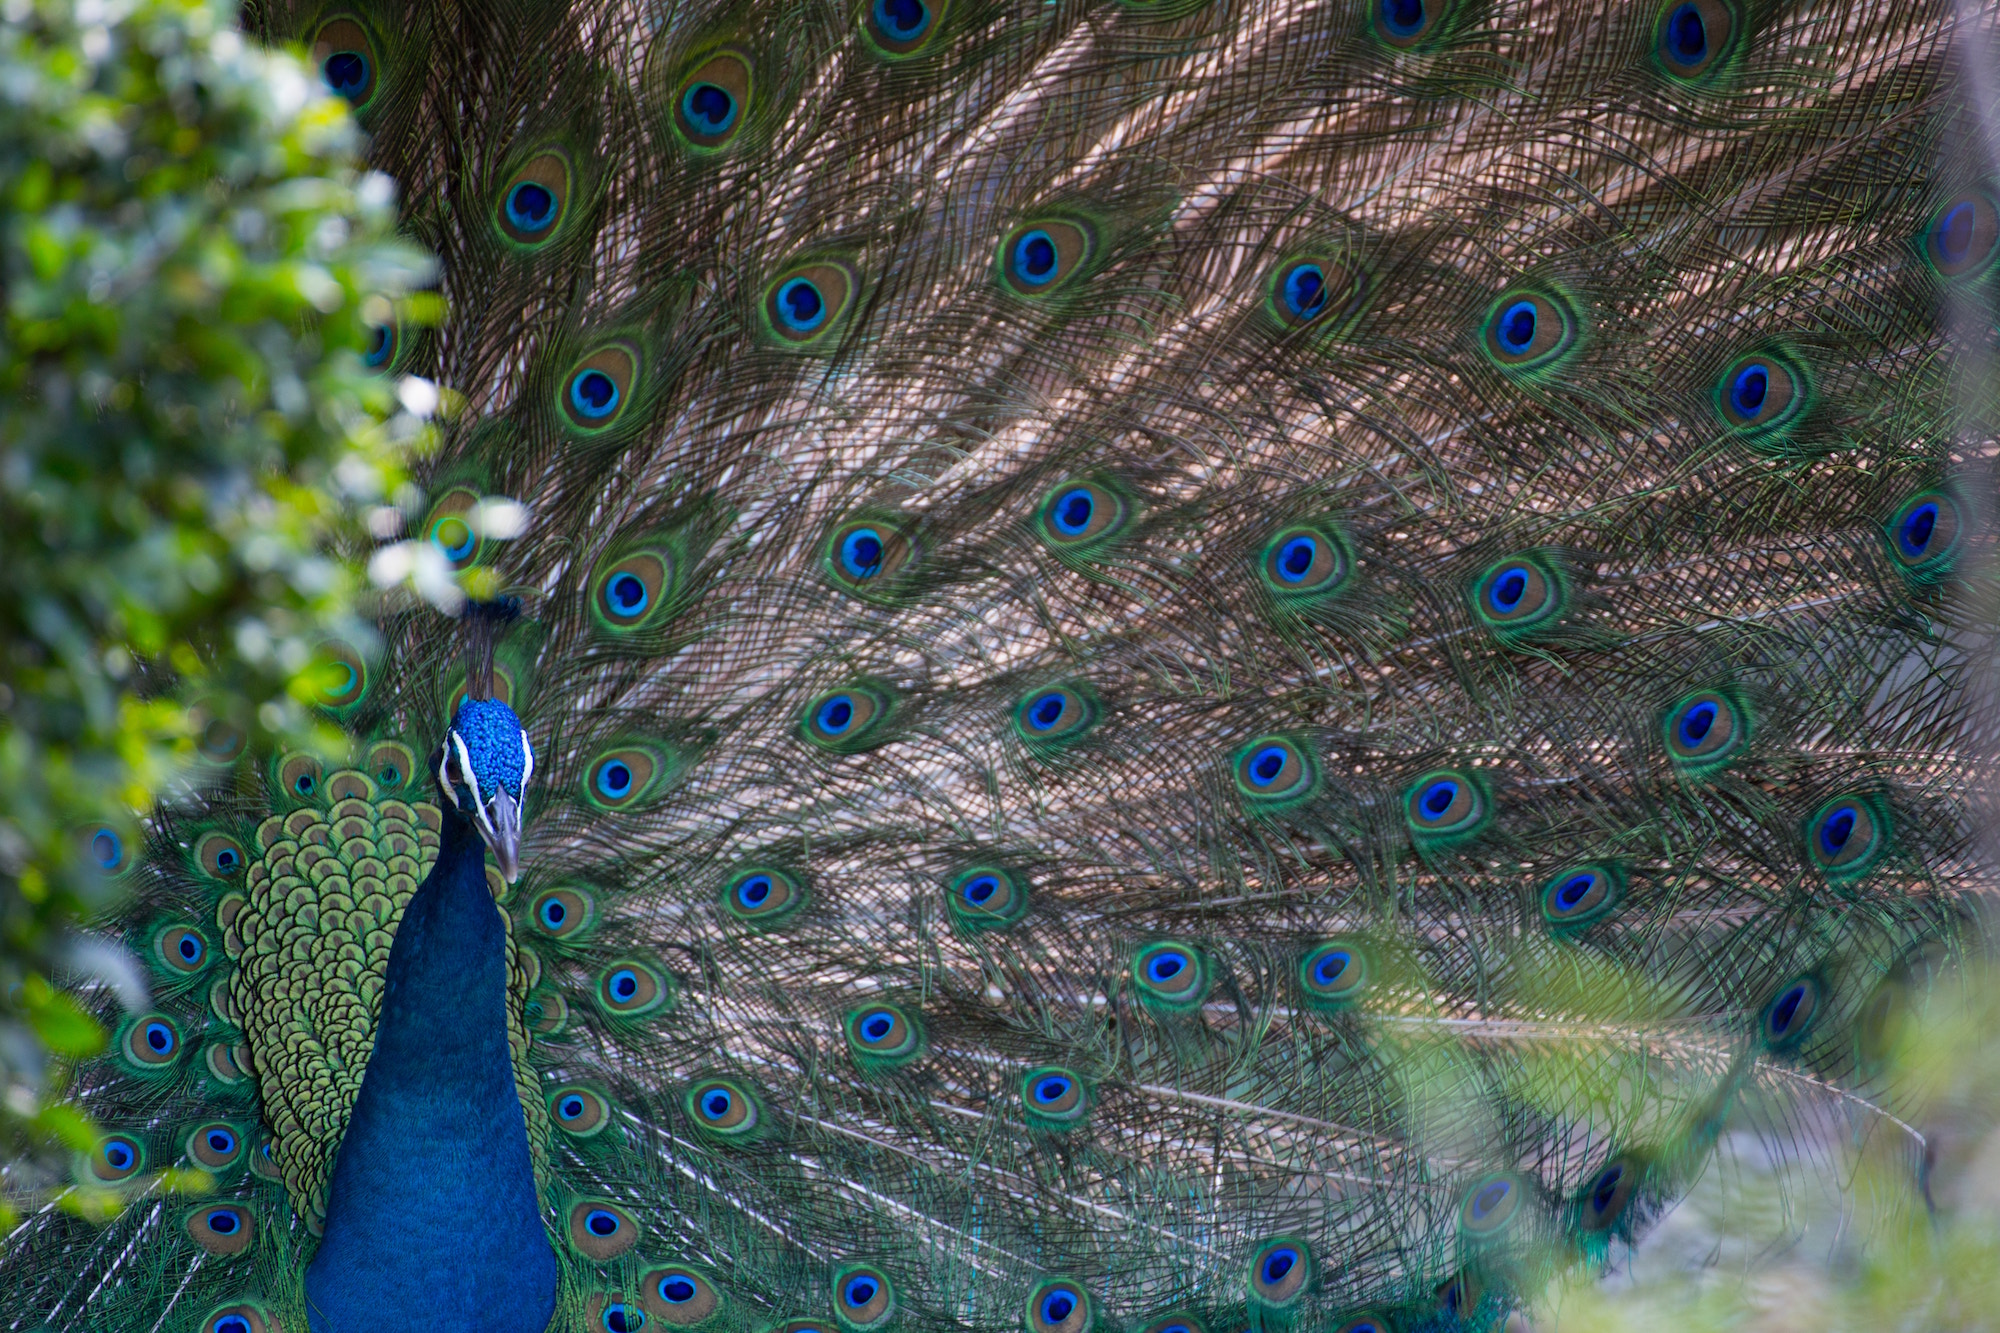 Photo Of A Peacock's Long Tail